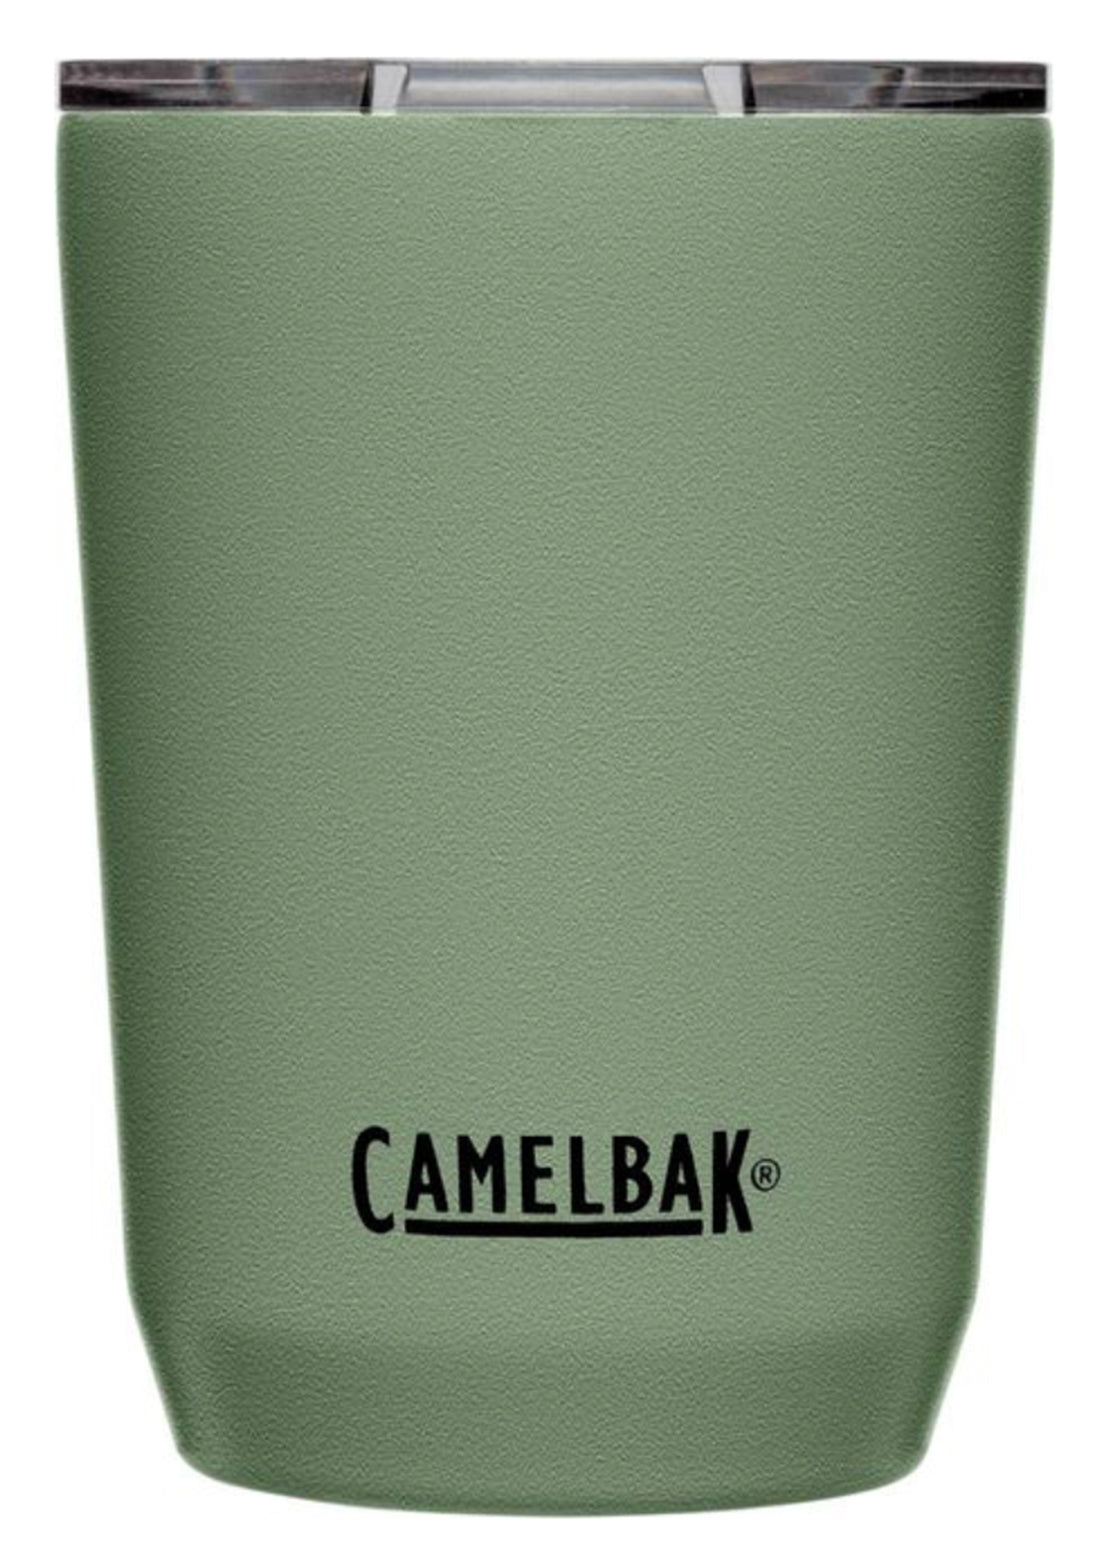 Camelbak Tumbler Stainless Steel Vacuum Insulated 12 oz Moss Front